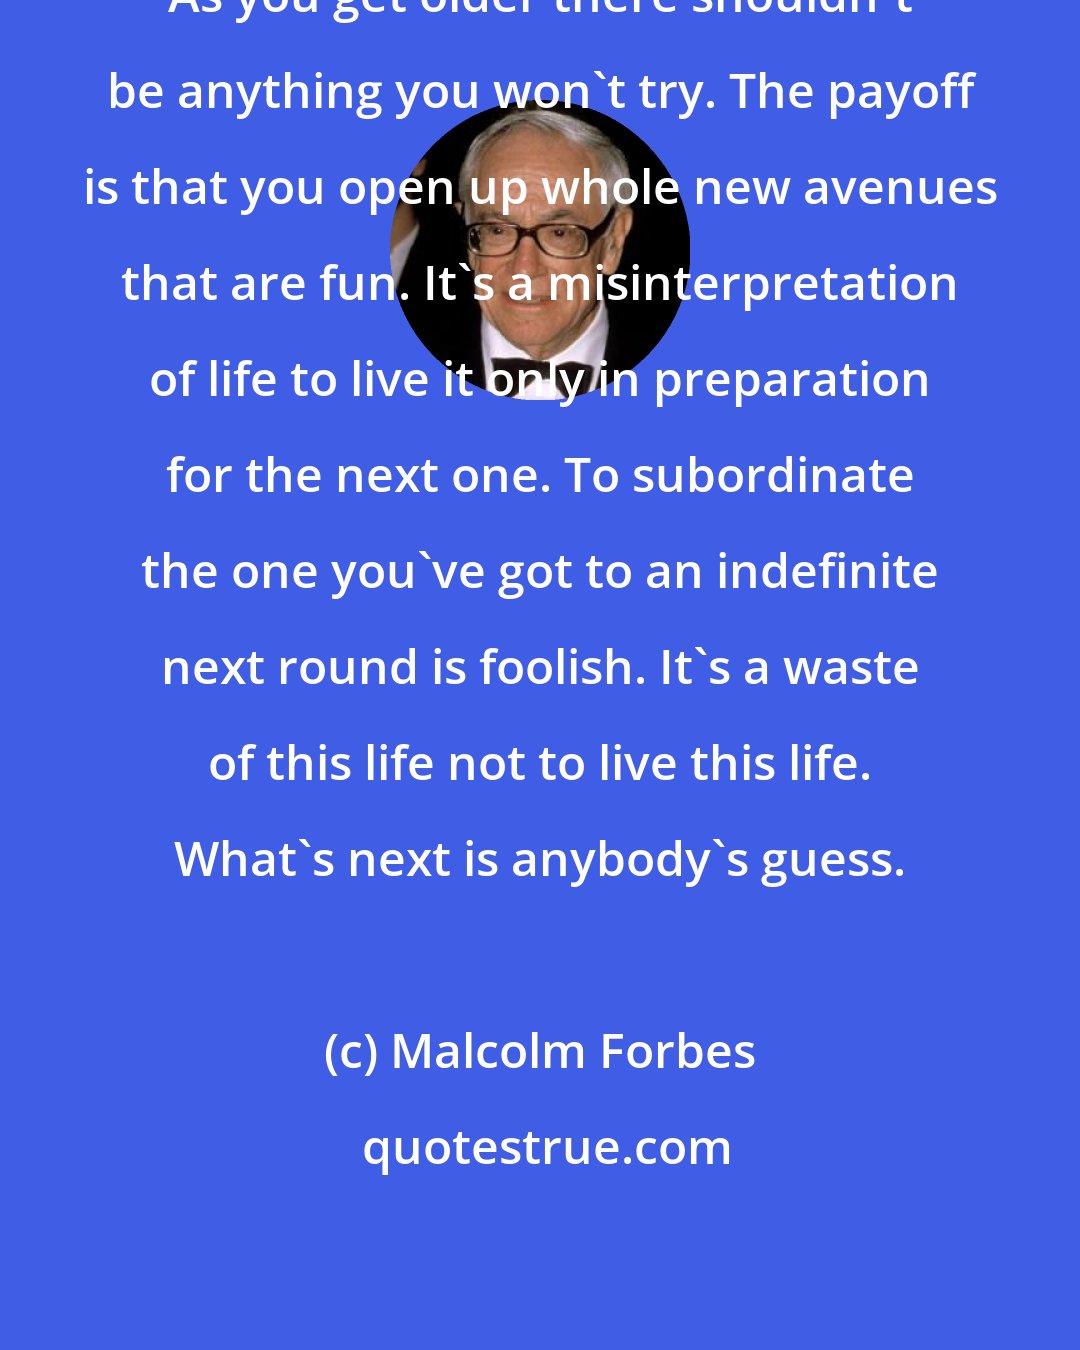 Malcolm Forbes: As you get older there shouldn't be anything you won't try. The payoff is that you open up whole new avenues that are fun. It's a misinterpretation of life to live it only in preparation for the next one. To subordinate the one you've got to an indefinite next round is foolish. It's a waste of this life not to live this life. What's next is anybody's guess.